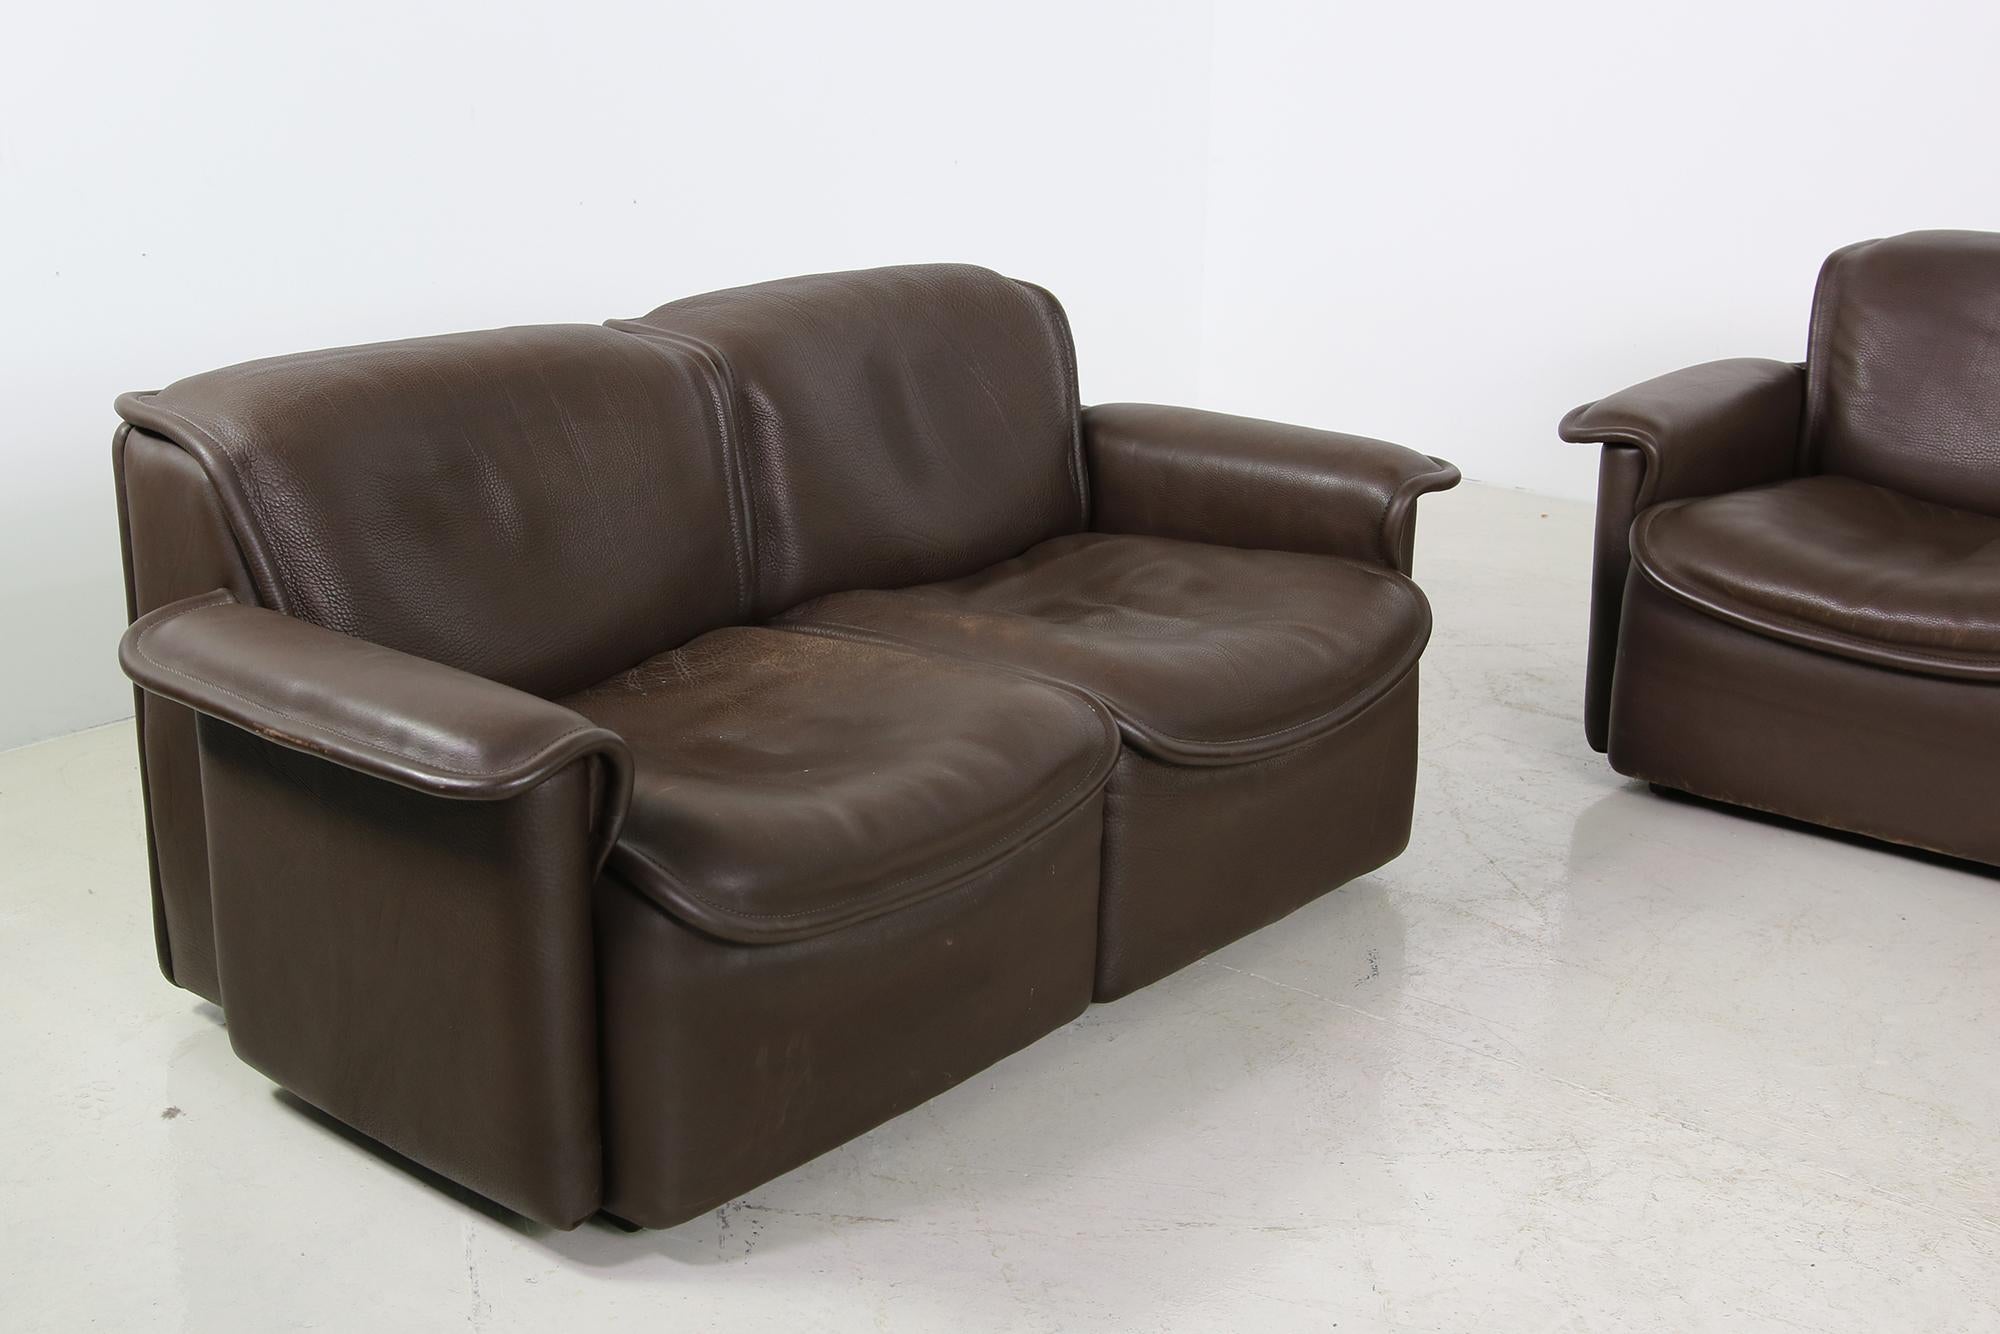 Vintage 1970s Modular De Sede DS 12 Brown Leather Sofa Set & Chair Seating Group 4